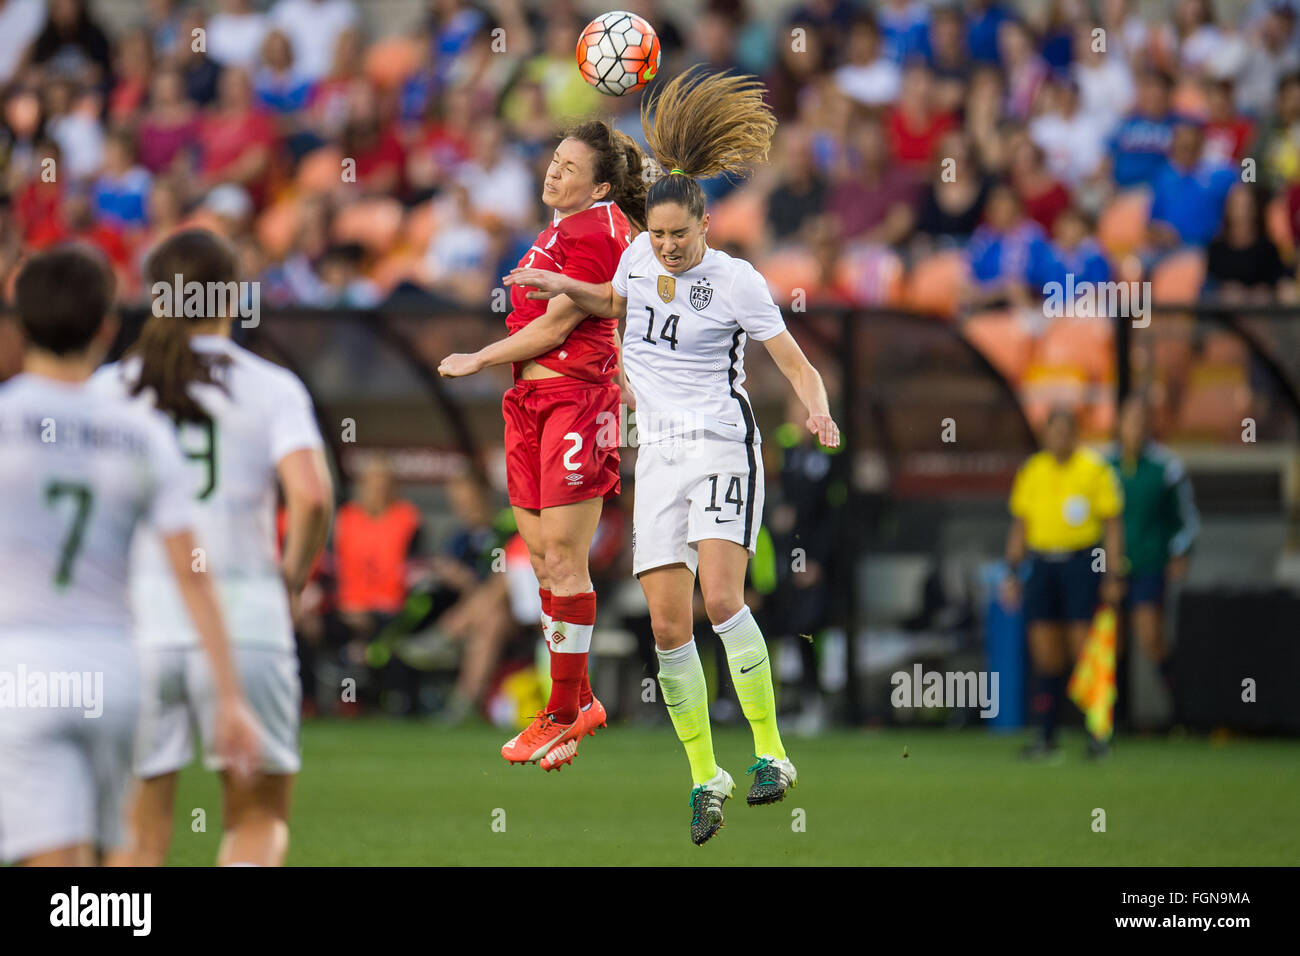 Houston, TX, USA. 21st Feb, 2016. United States midfielder Morgan Brian (14) and Canada defender Allysha Chapman (2) battle for a header during the Final match of the CONCACAF Olympic Qualifying tournament between Canada and the USA at BBVA Compass Stadium in Houston, TX. USA won 2-0.Trask Smith/CSM/Alamy Live News Stock Photo